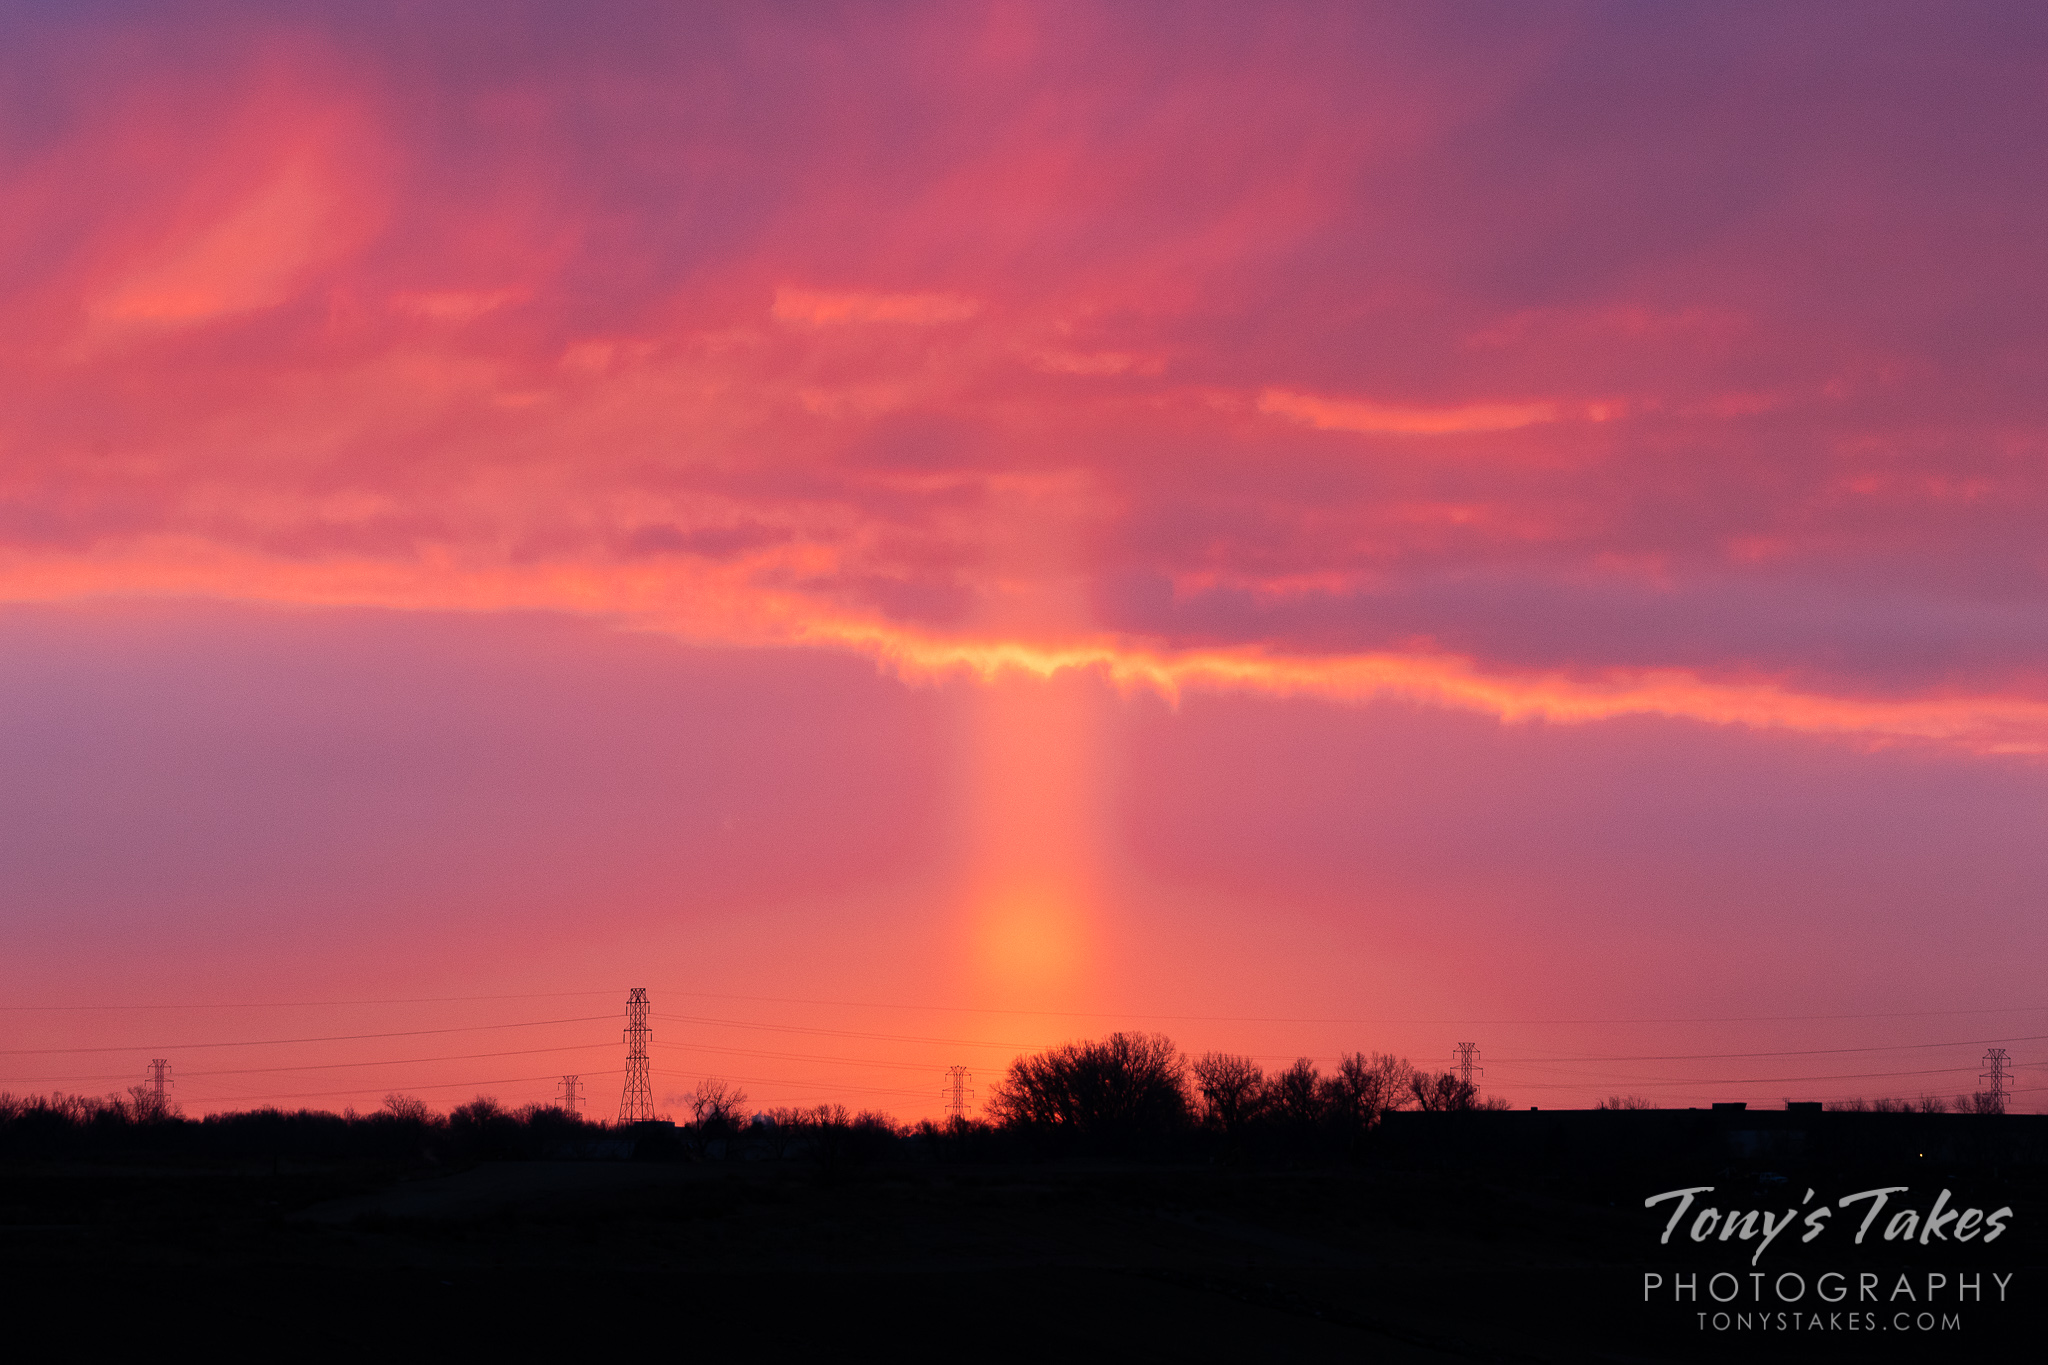 A sun pillar rises from the ground to the sky on the Colorado plains. (© Tony’s Takes)